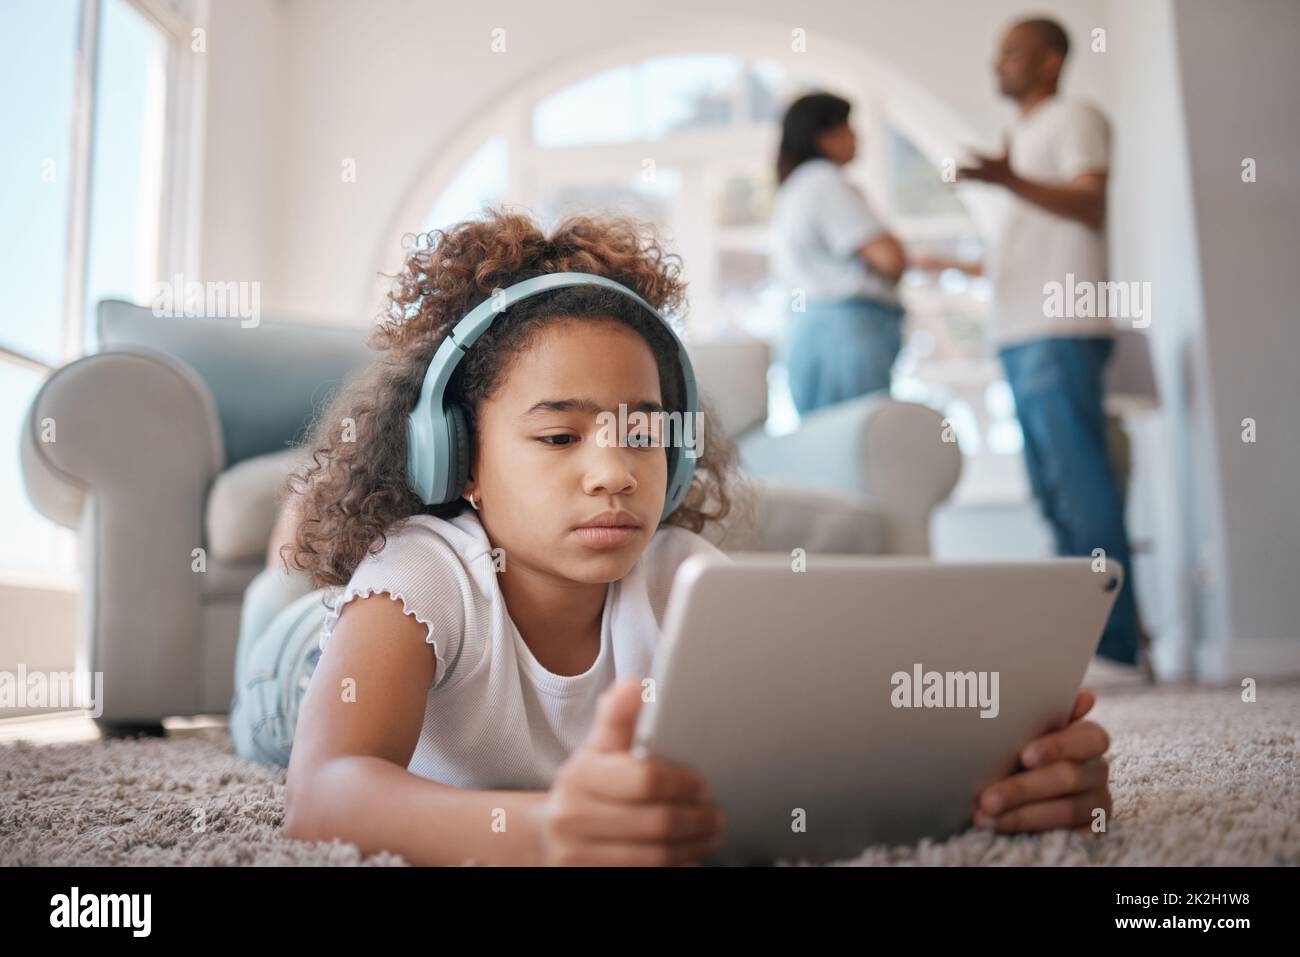 Things are looking rocky. Shot of a young girl using a digital tablet while her parents argue. Stock Photo